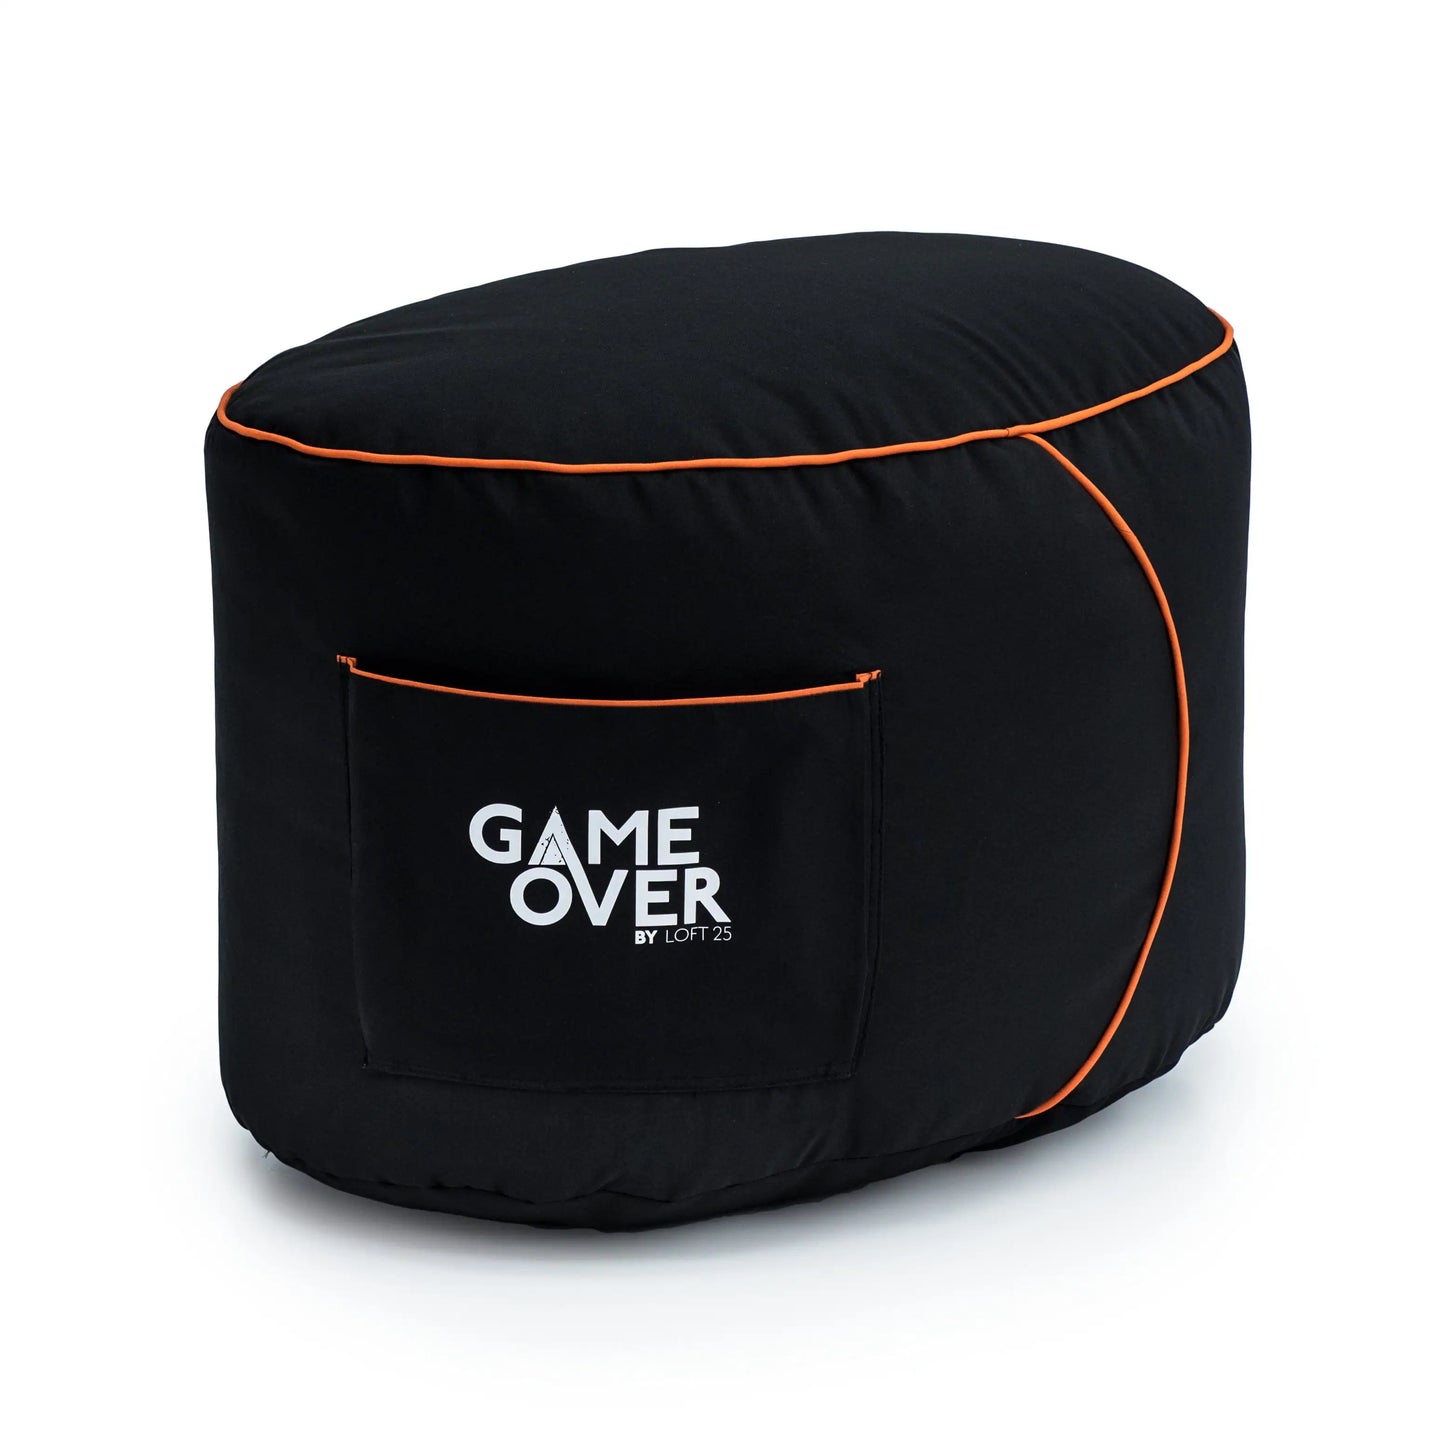 Black bean bag ottoman cover with orange trim and "GAME OVER" logo